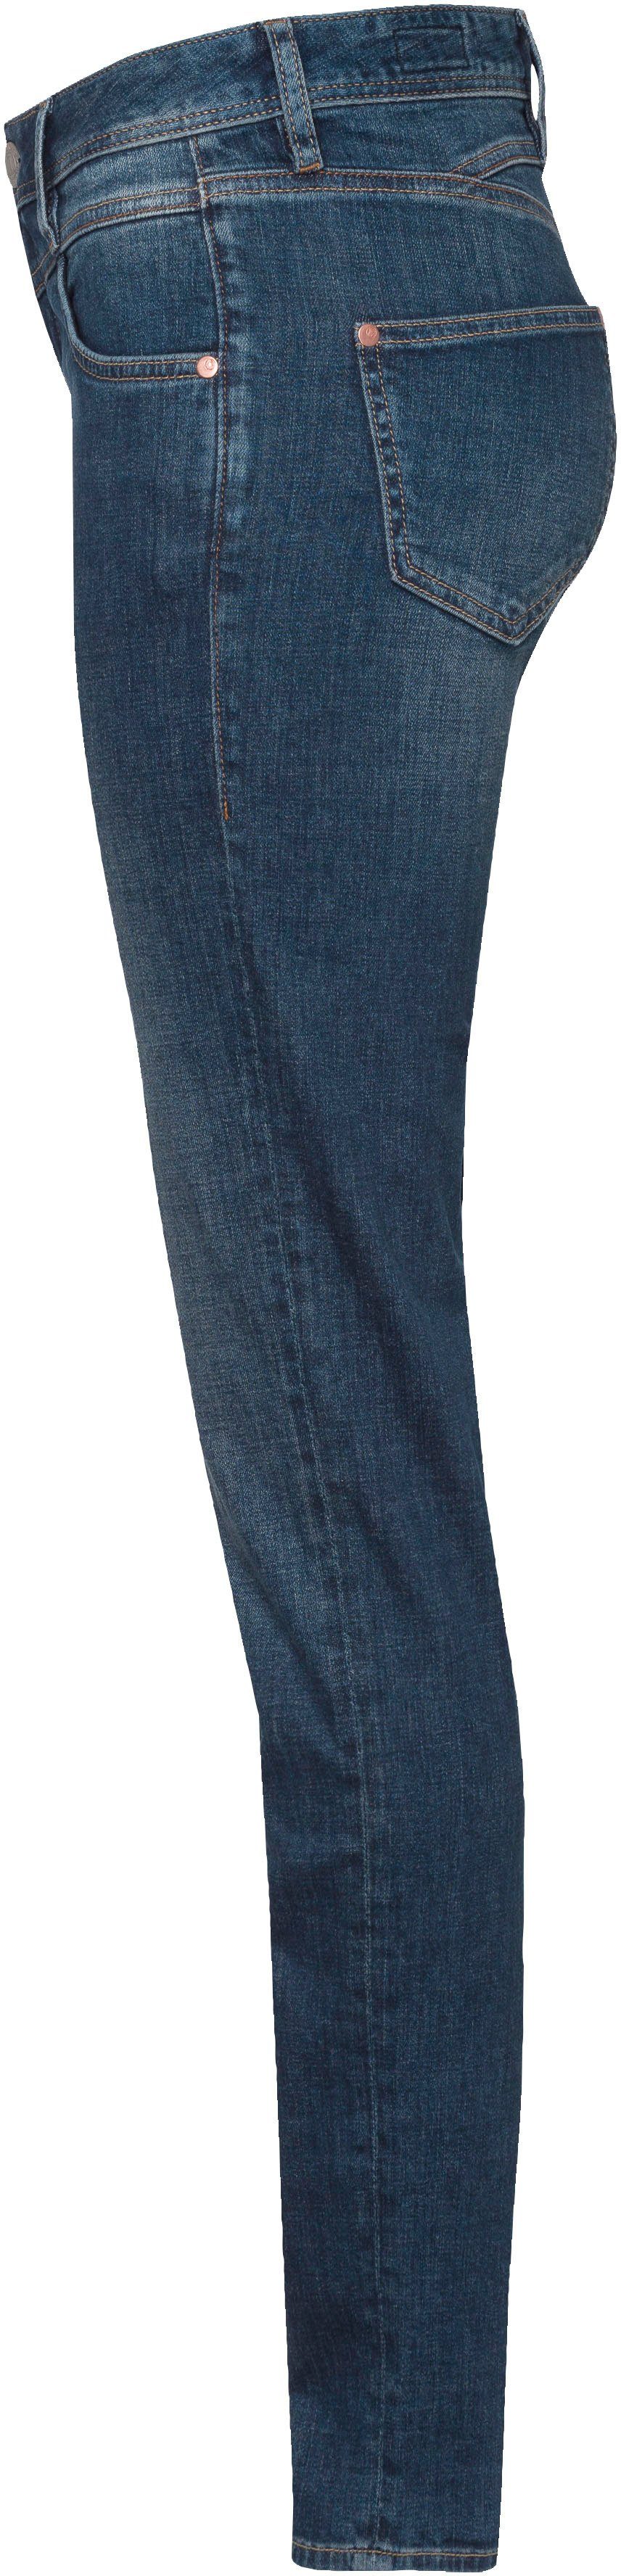 Waist PEPPY 034 Normal SLIM Polyester RECYCLED Slim-fit-Jeans Herrlicher Recycled used DENIM